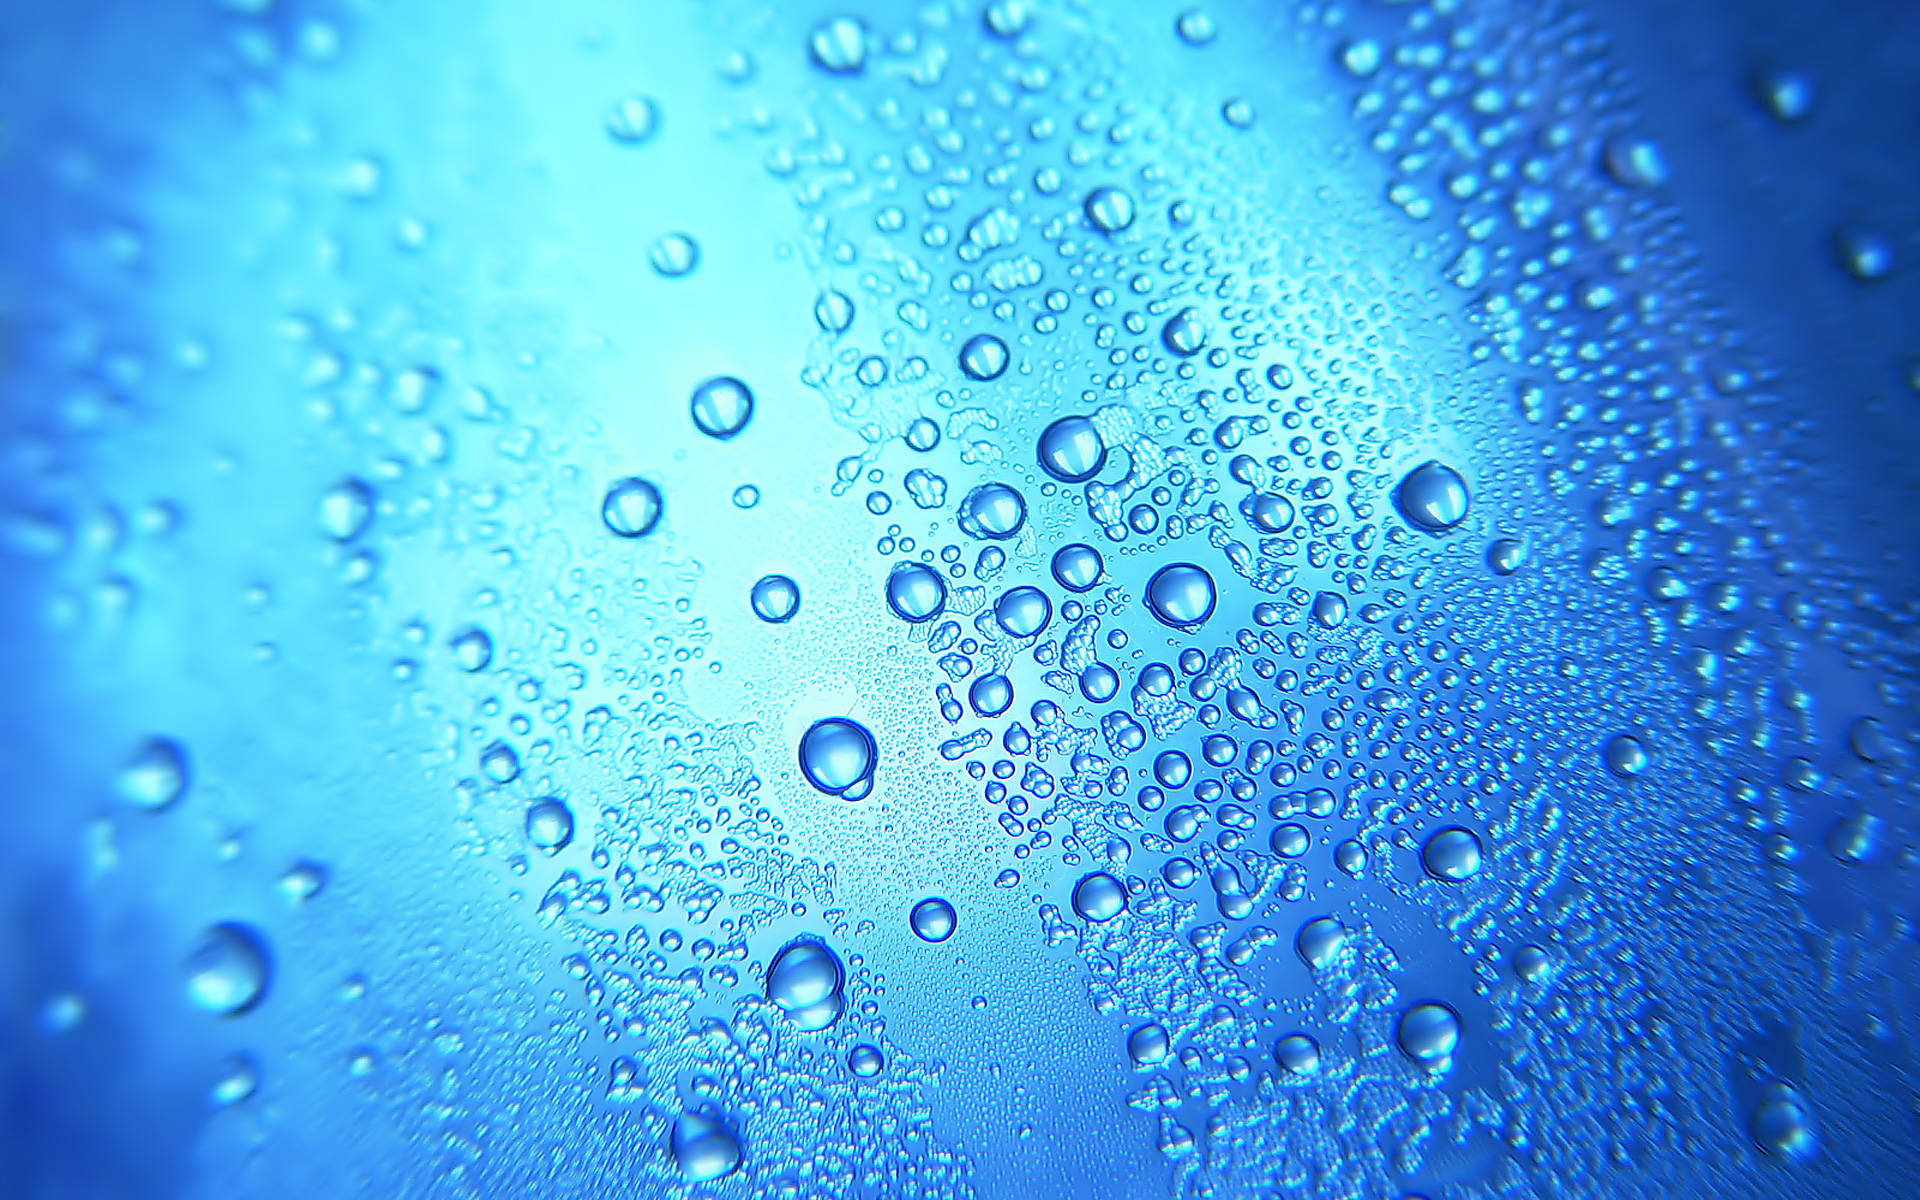 Gallery For gt Raindrops Wallpaper Blue